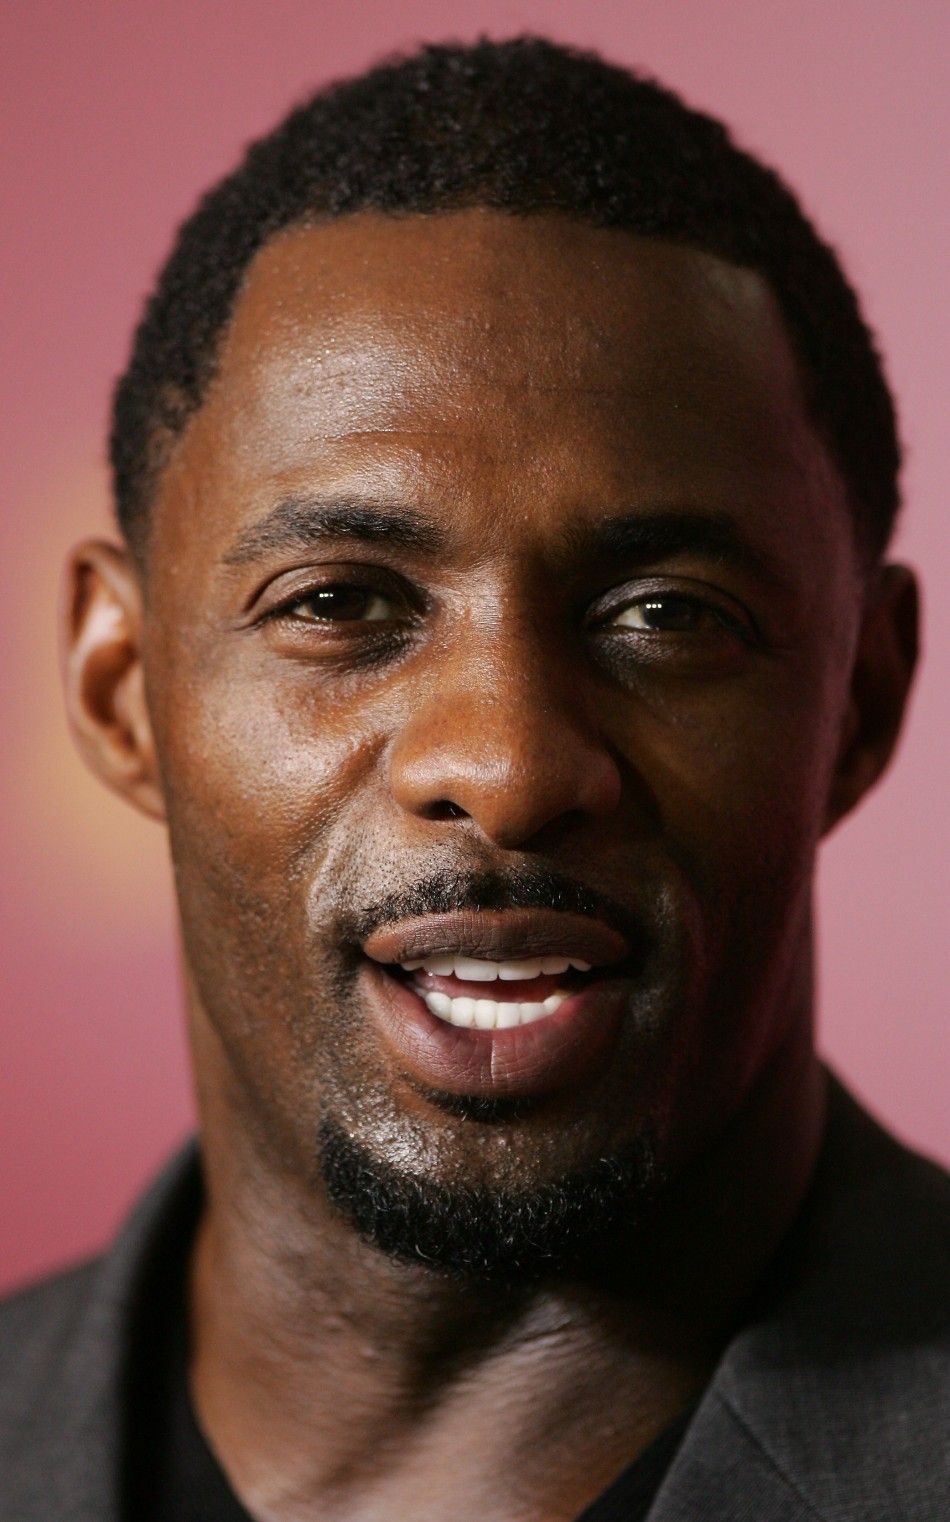 British actor Idris Elba poses during a photocall for the U.S.Rwanda film Sometimes in April by U.S. director Raoul Peck at the 55th Berlinale International Film Festival in Berlin February 17, 2005.